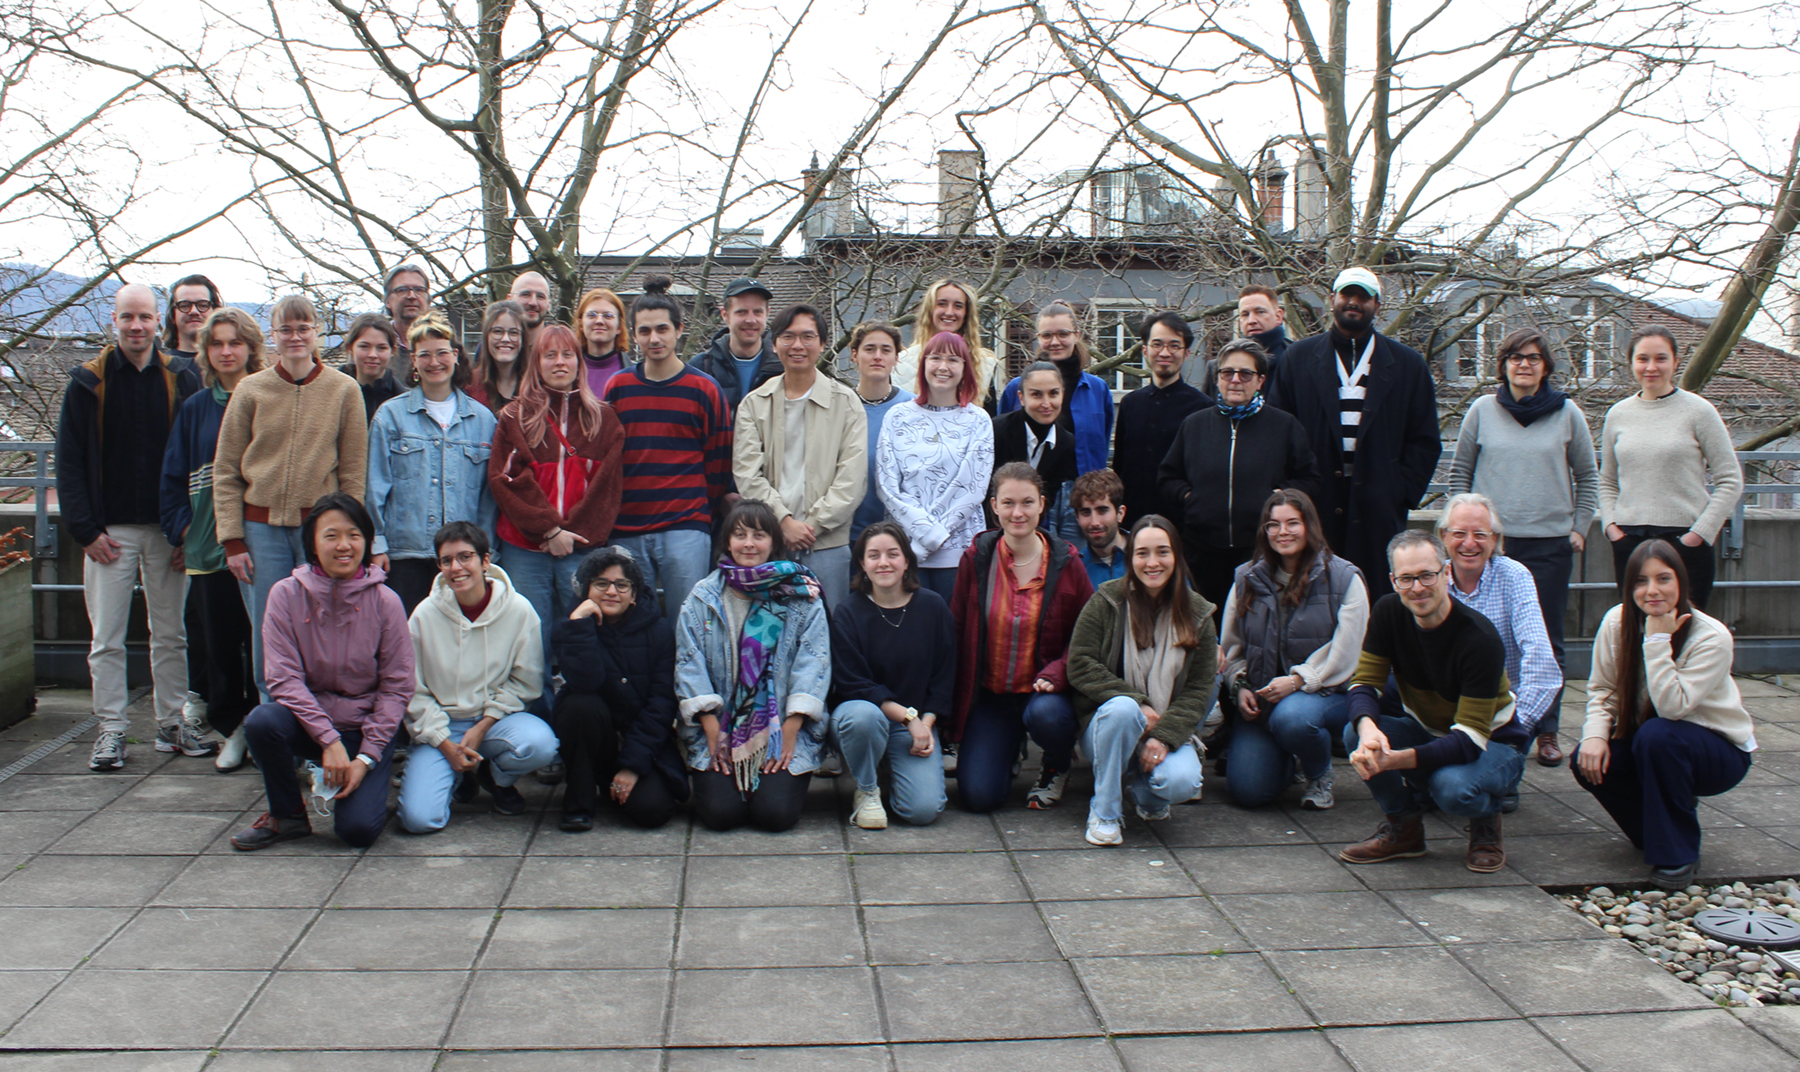 Enlarged view: Photo of the CS24 group